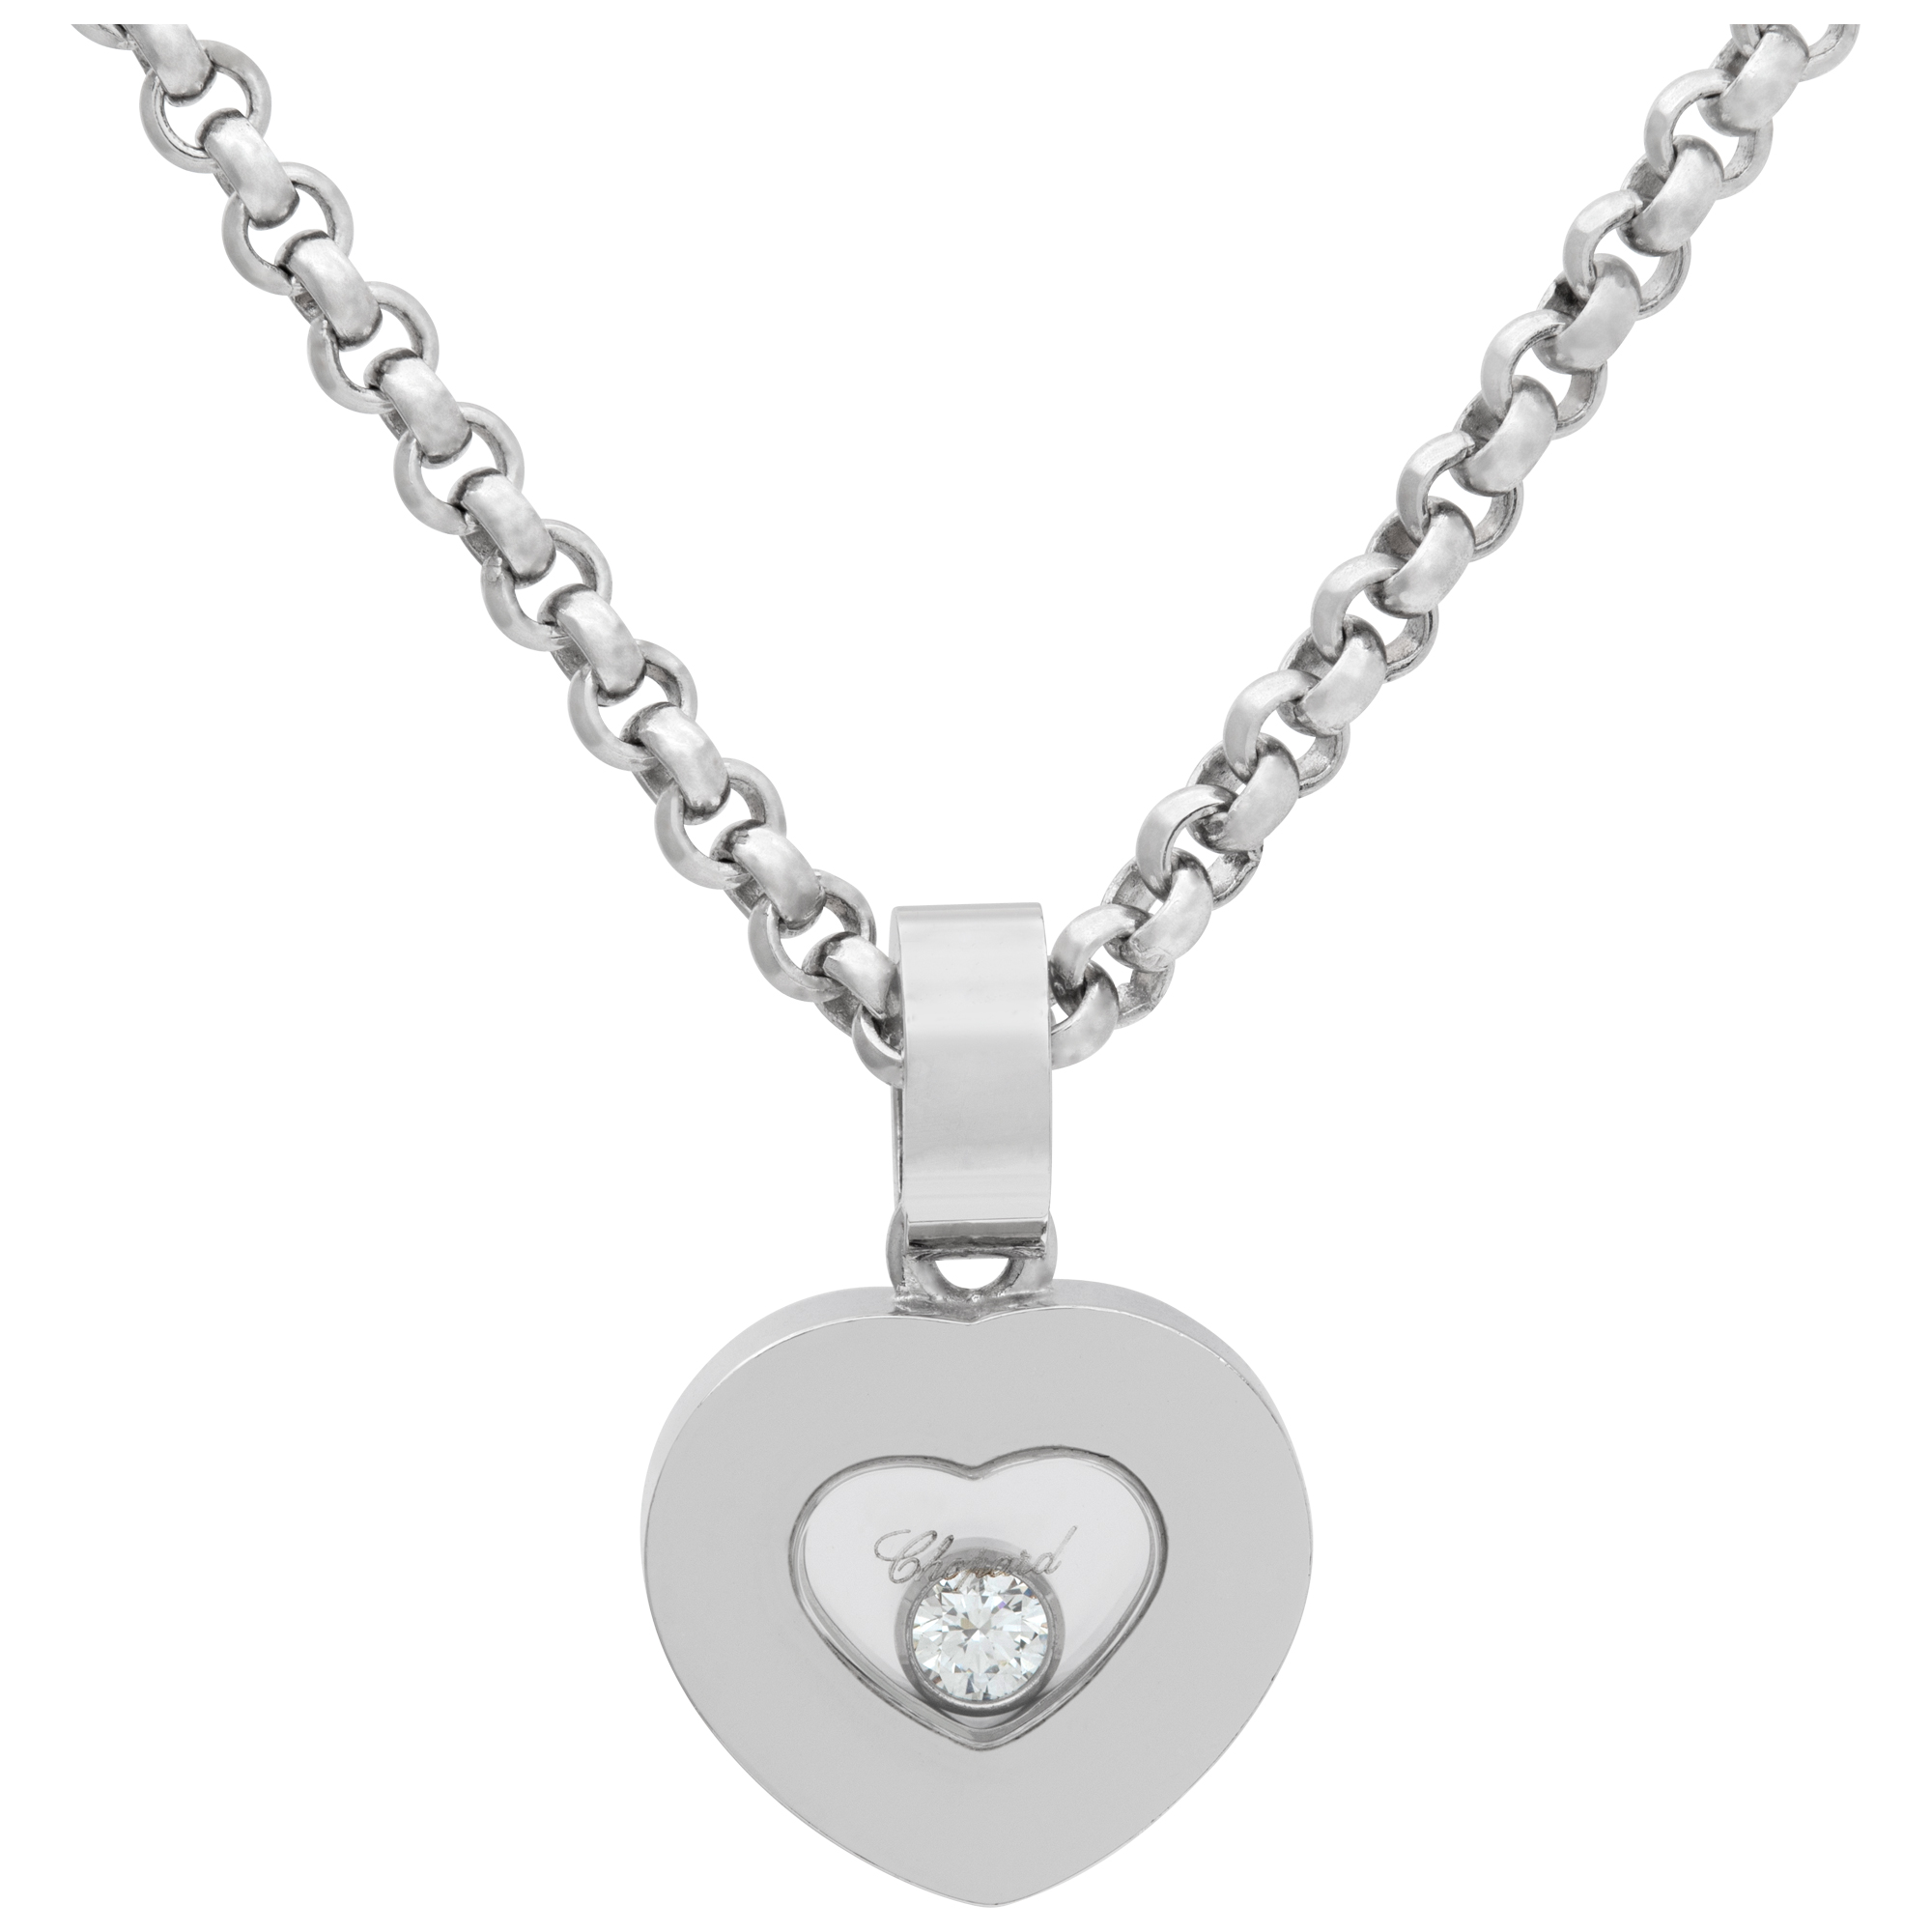 Chopard Happy Sport Heart pendant and chain in 18k white gold